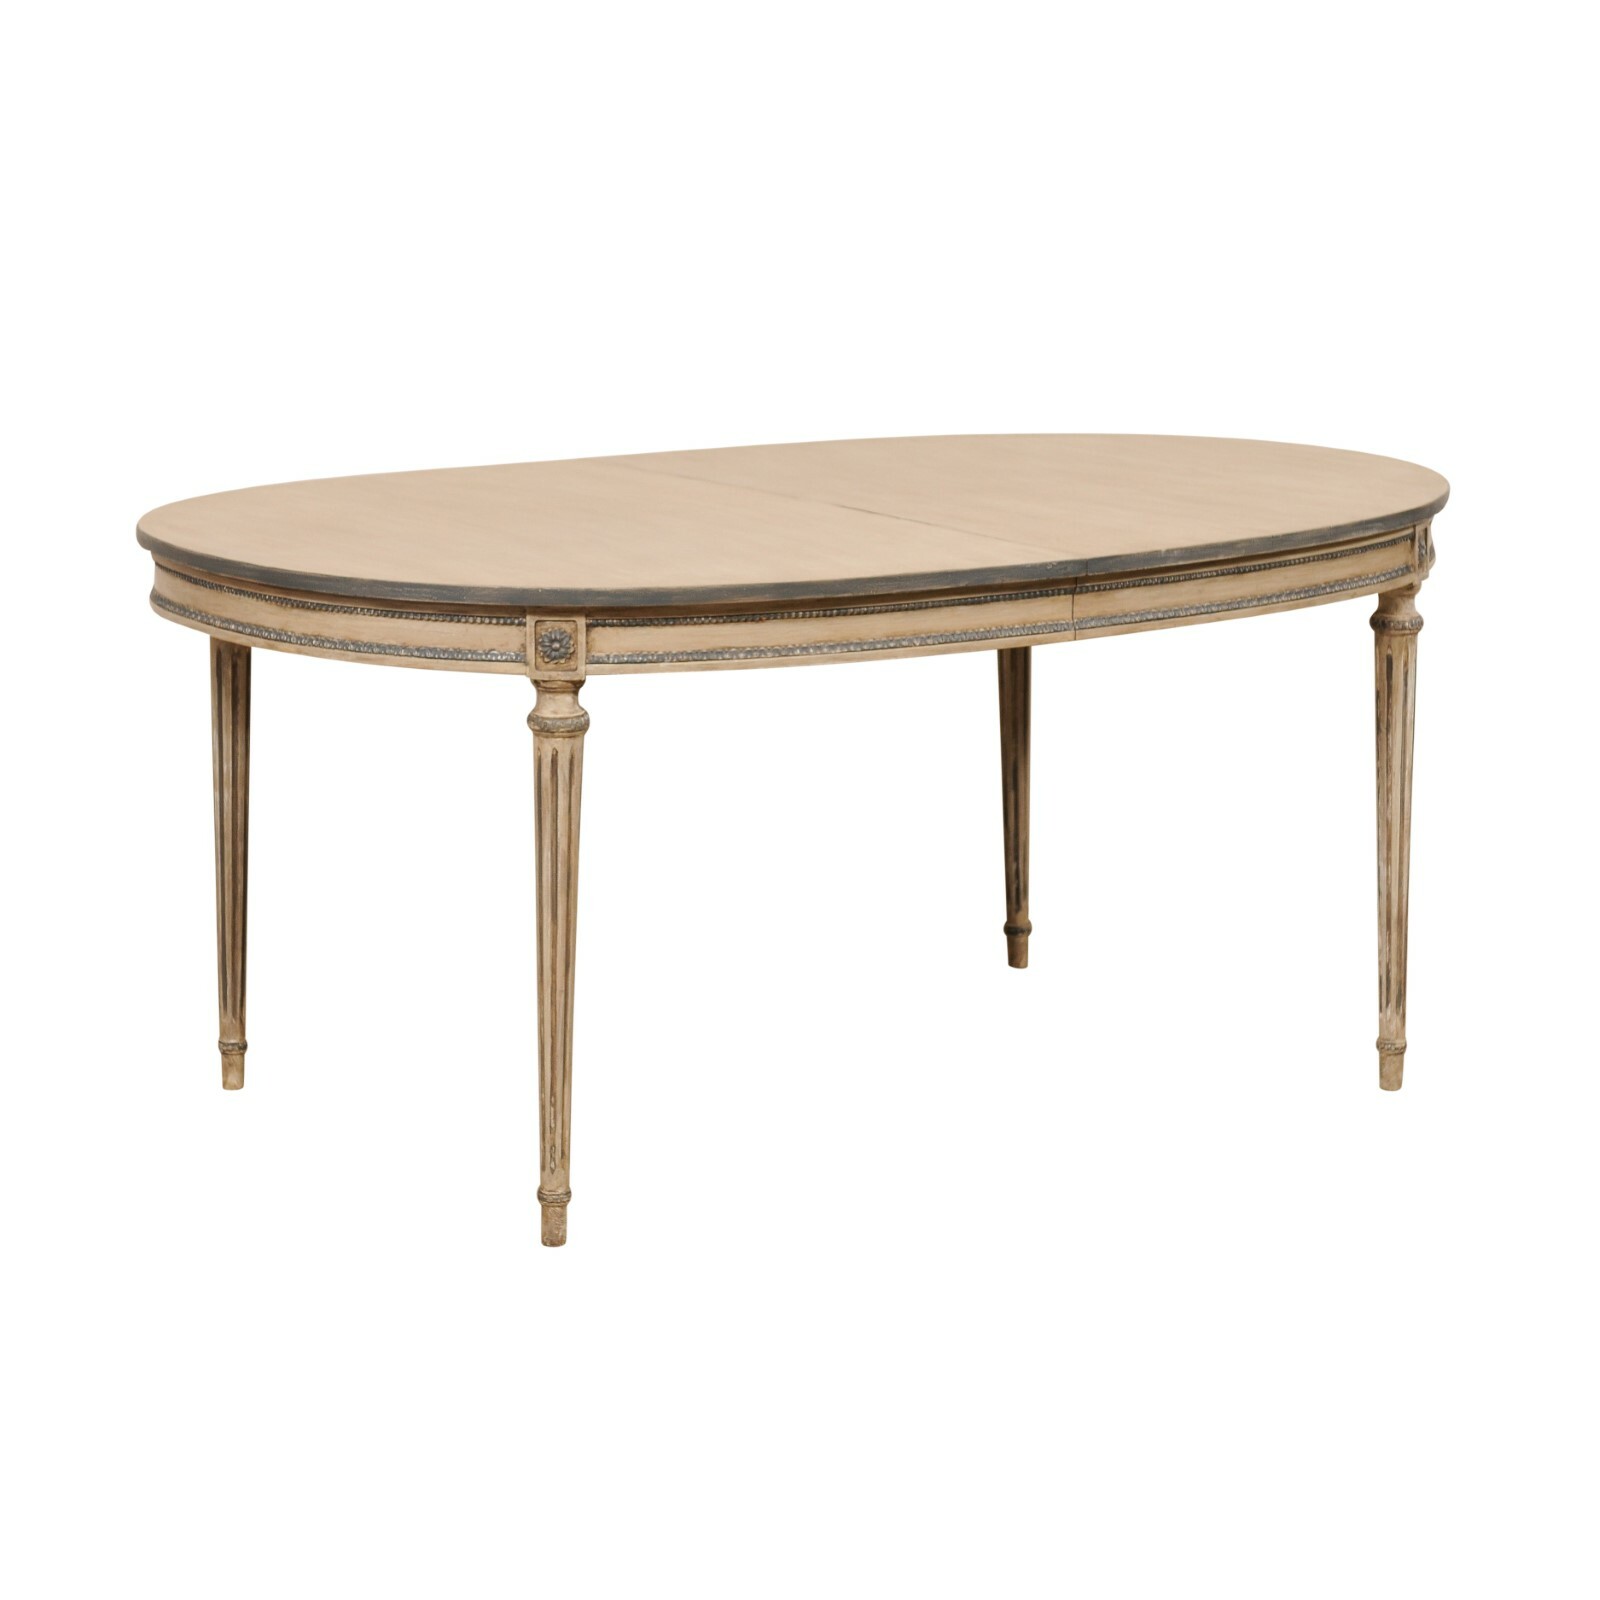 Oval-Shaped Dining Table on Fluted Legs